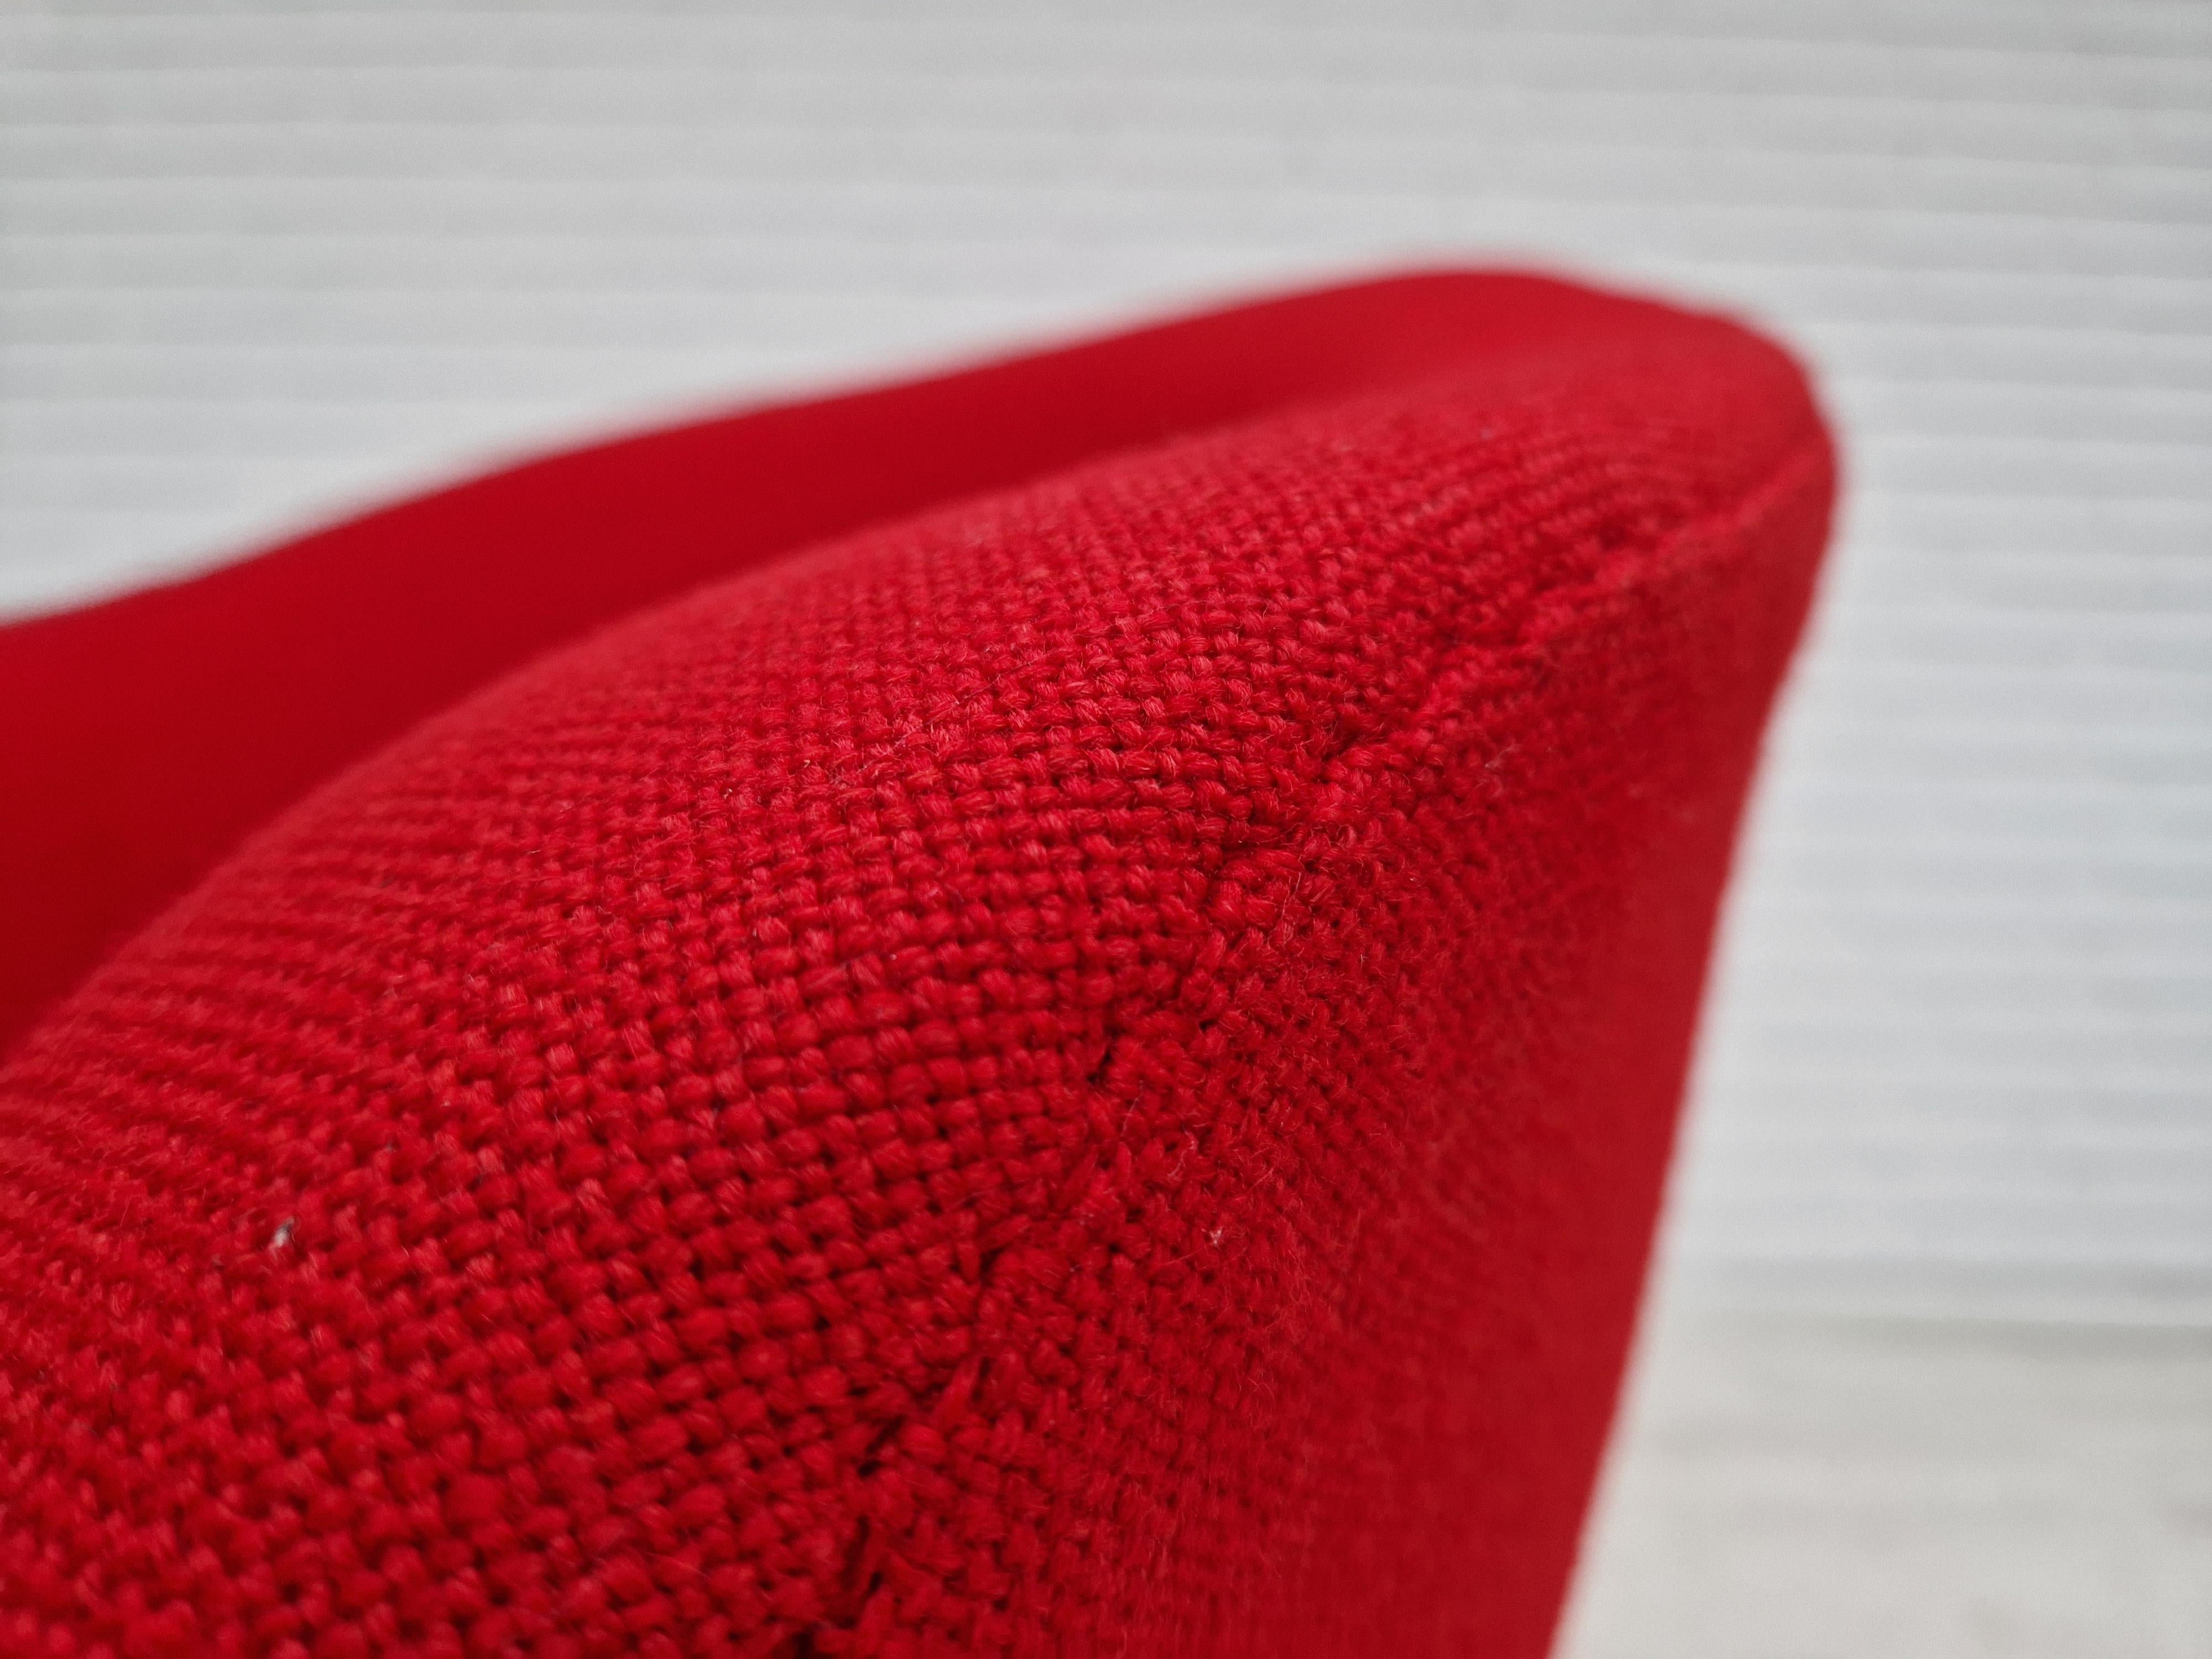 1960s, Scandinavian design by Karl Eric Klote for Overman. Mid-Century swivel lounge chair in red wool KVADRAT upholstery. Removable cushion and chrome swivel base. Reupholstered and hand sewn by craftsman.